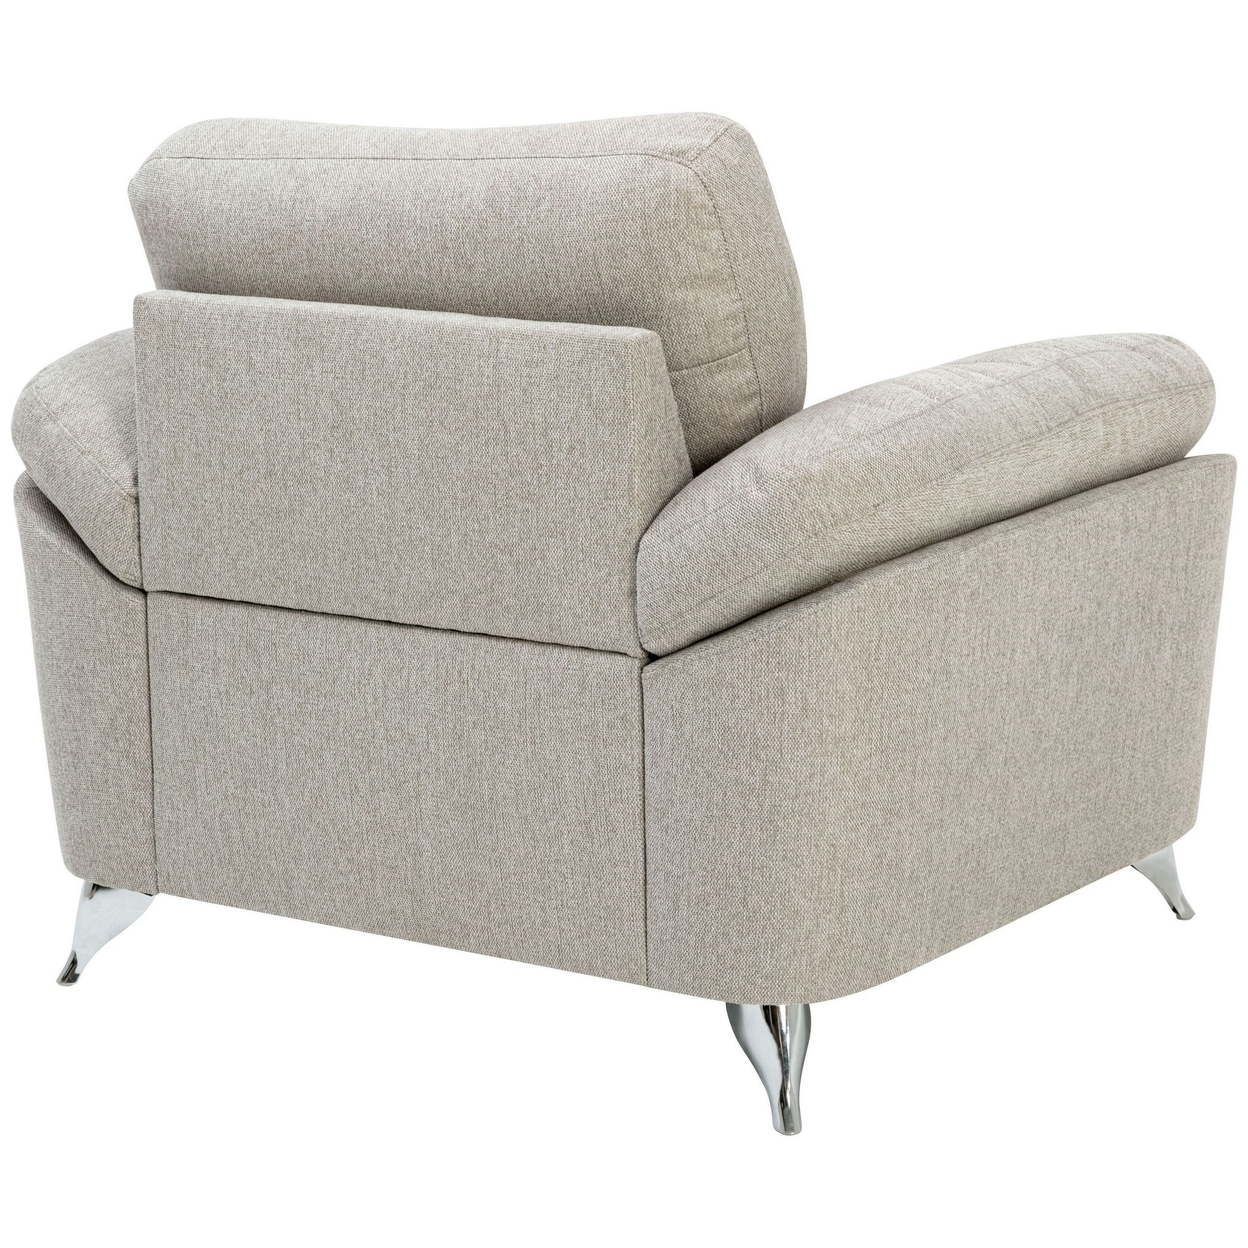 Luis 35 Inch Accent Chair, Light Gray Polyester, Sloped Pillow Top Arms- Saltoro Sherpi